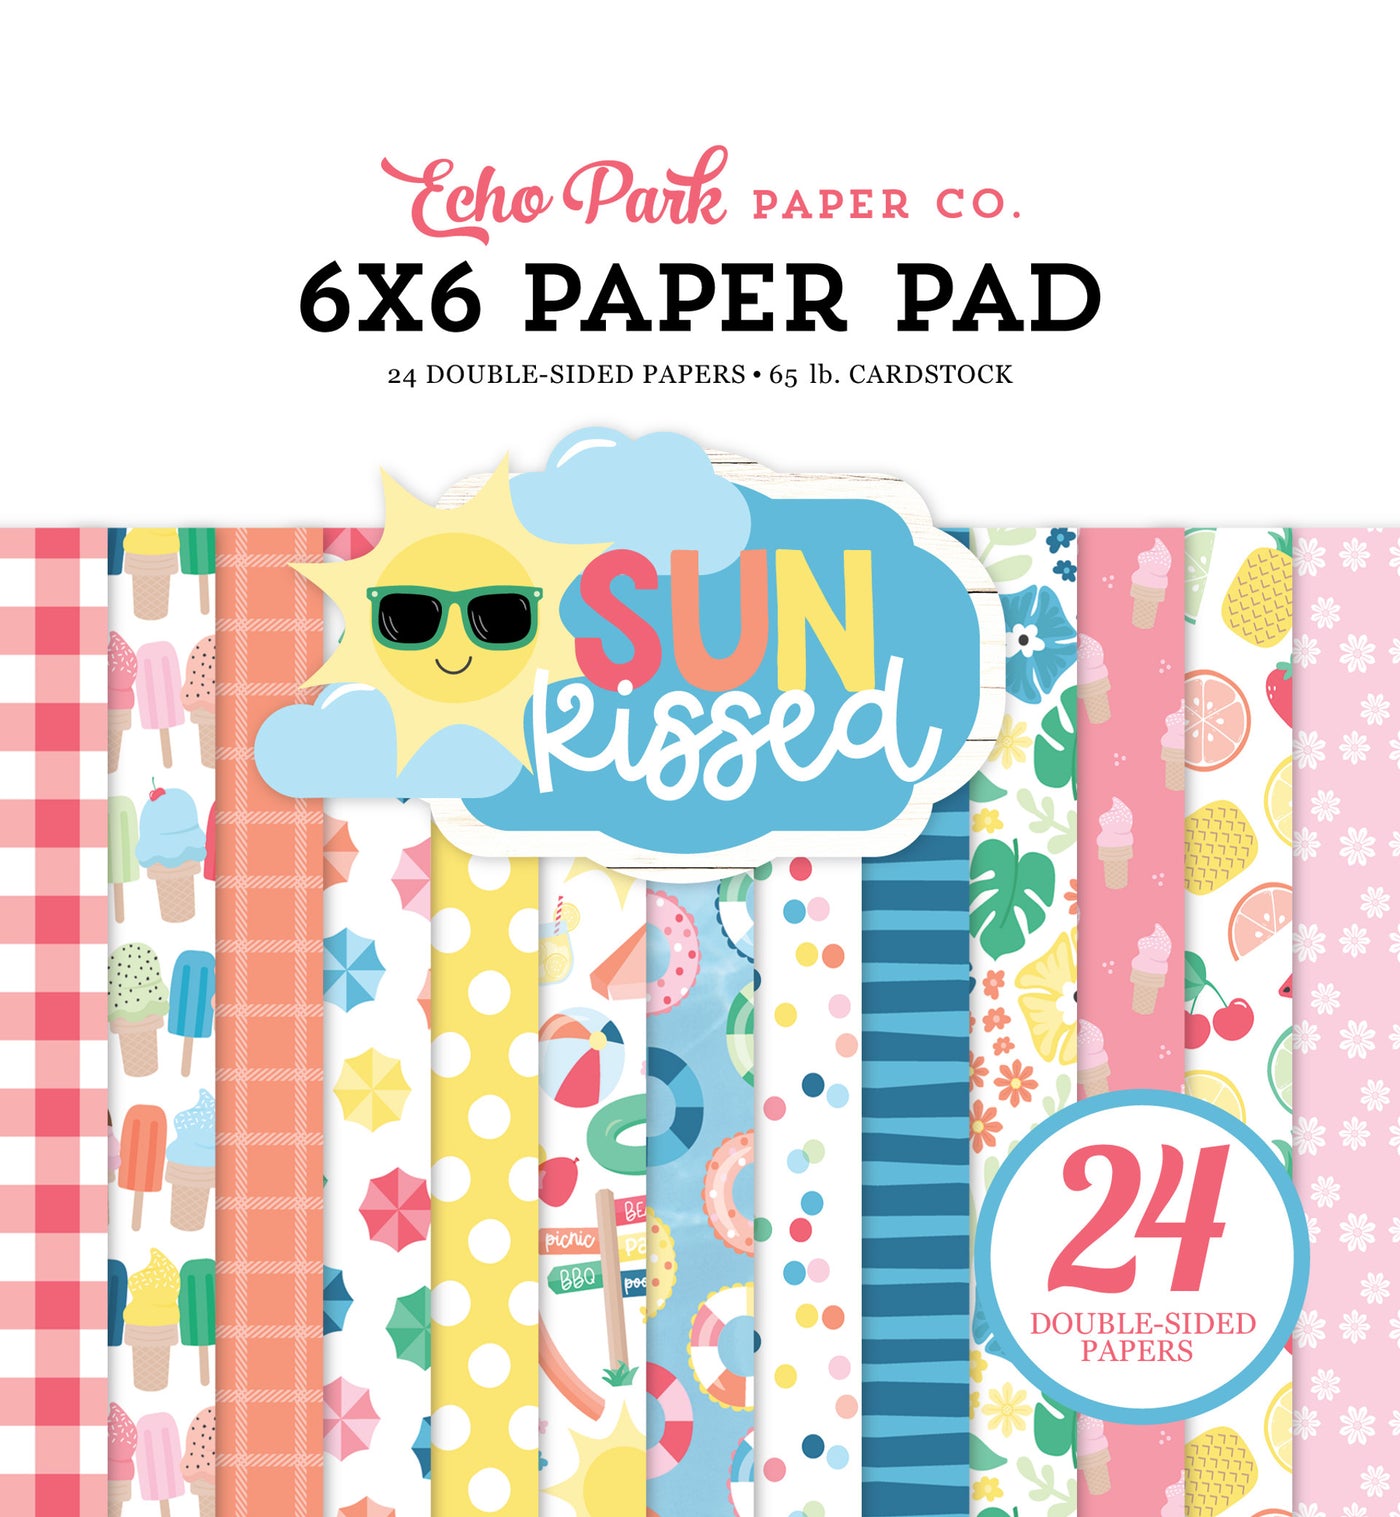 The 6x6 pad is loaded with fun, summer-related graphics and patterns. It is fun for cards and papercrafts. It includes 24 double-sided pages.